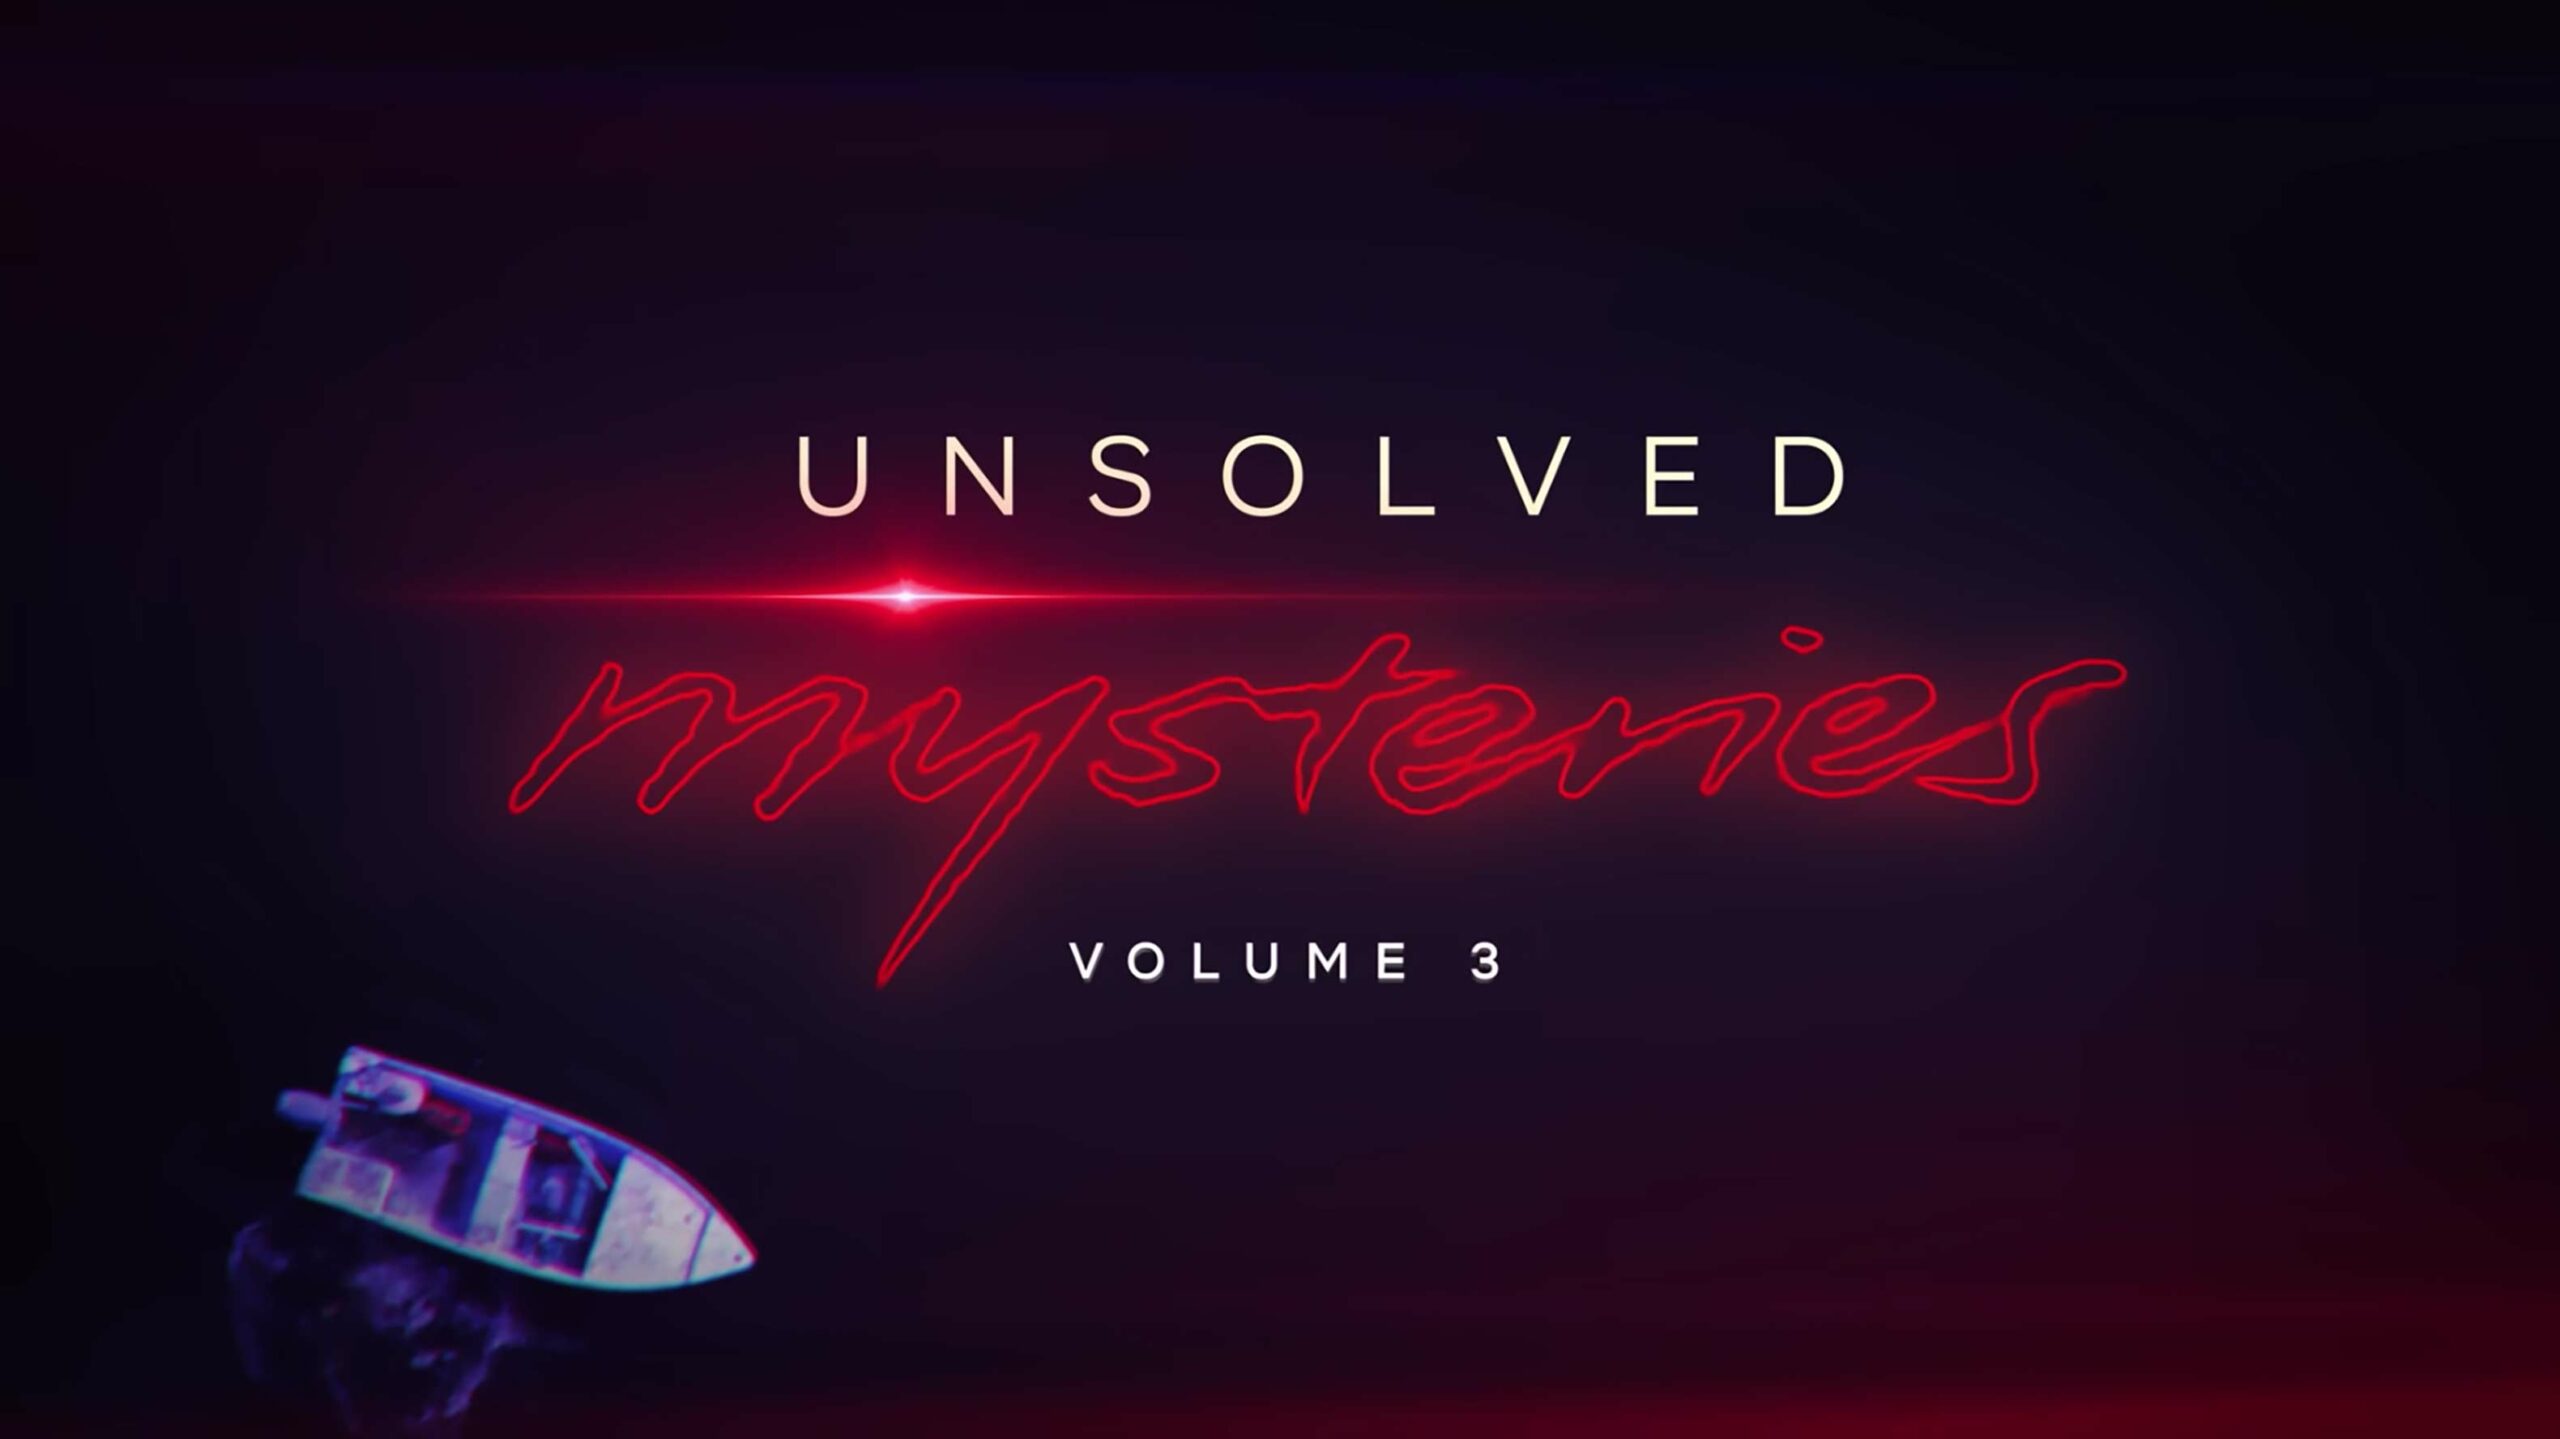 Unsolved Mysteries Volume 3 title card